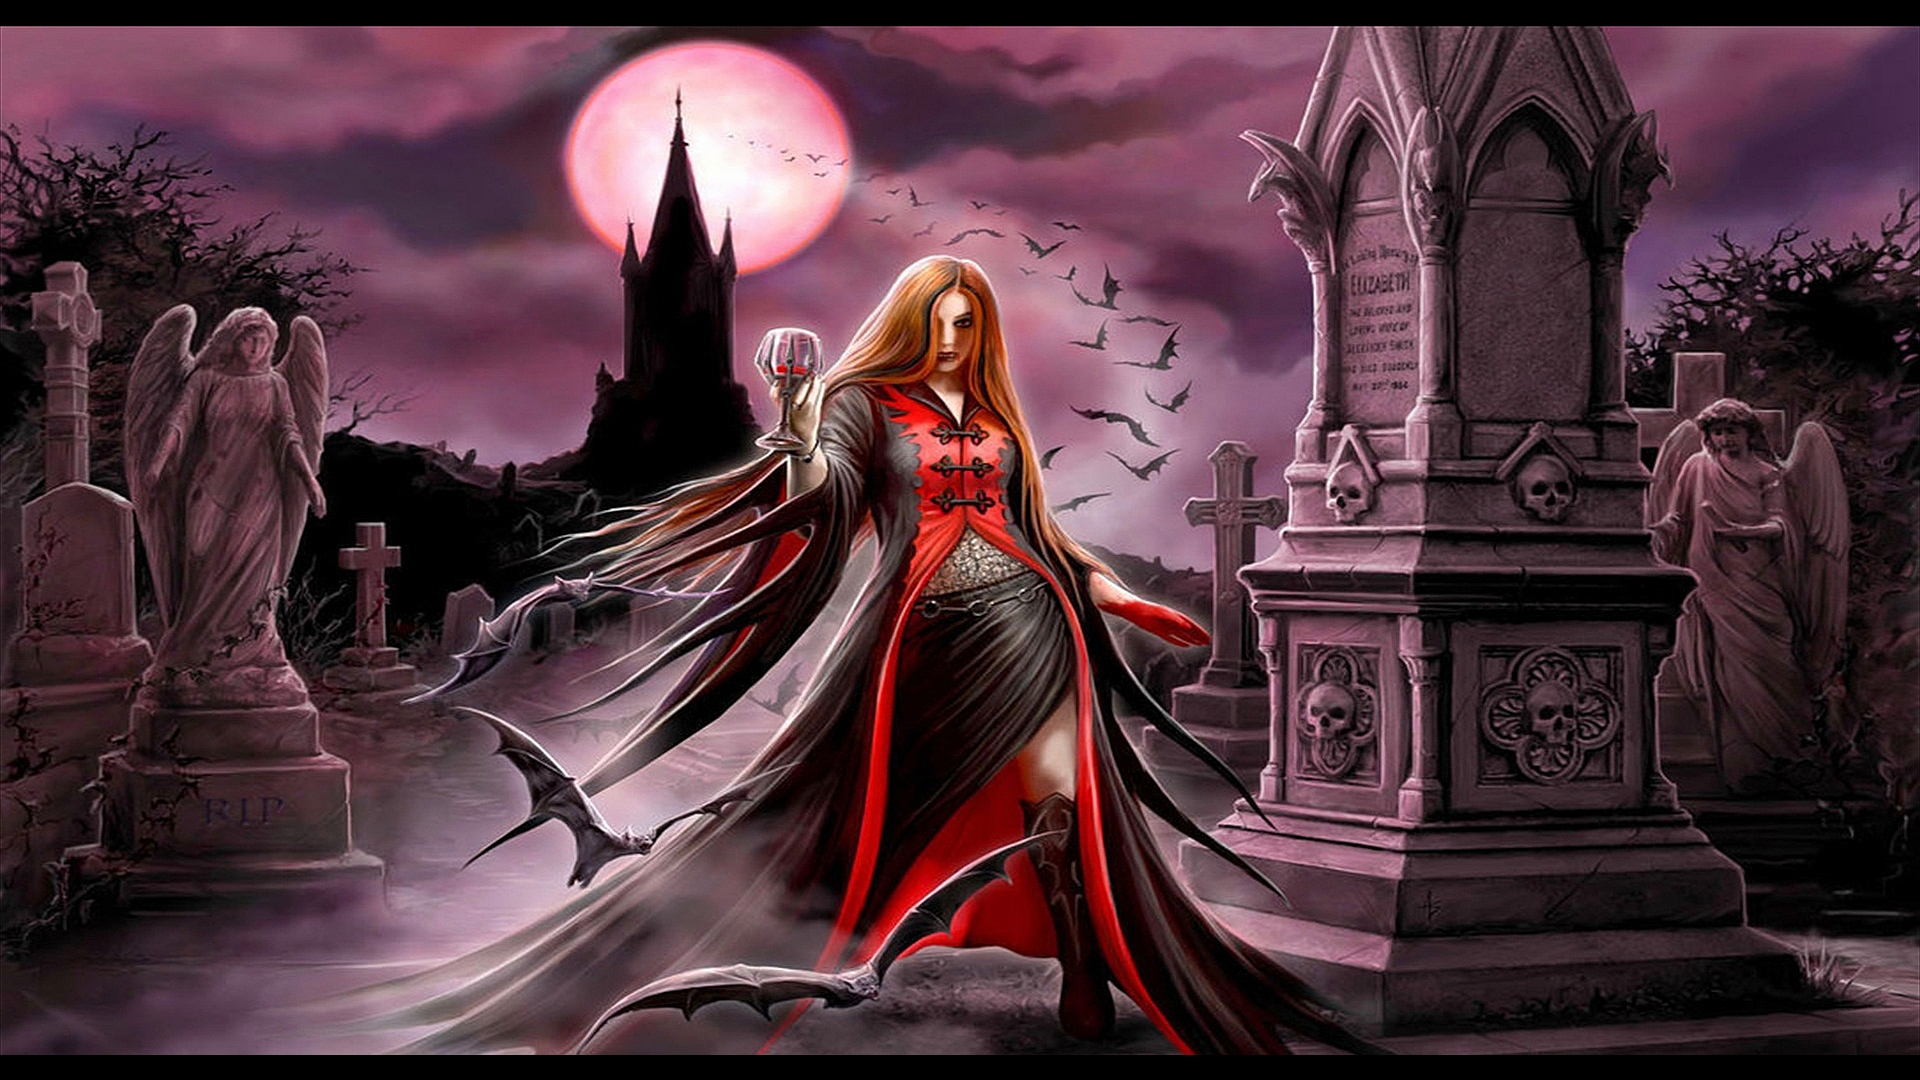 Blood Moon by Anne Stokes